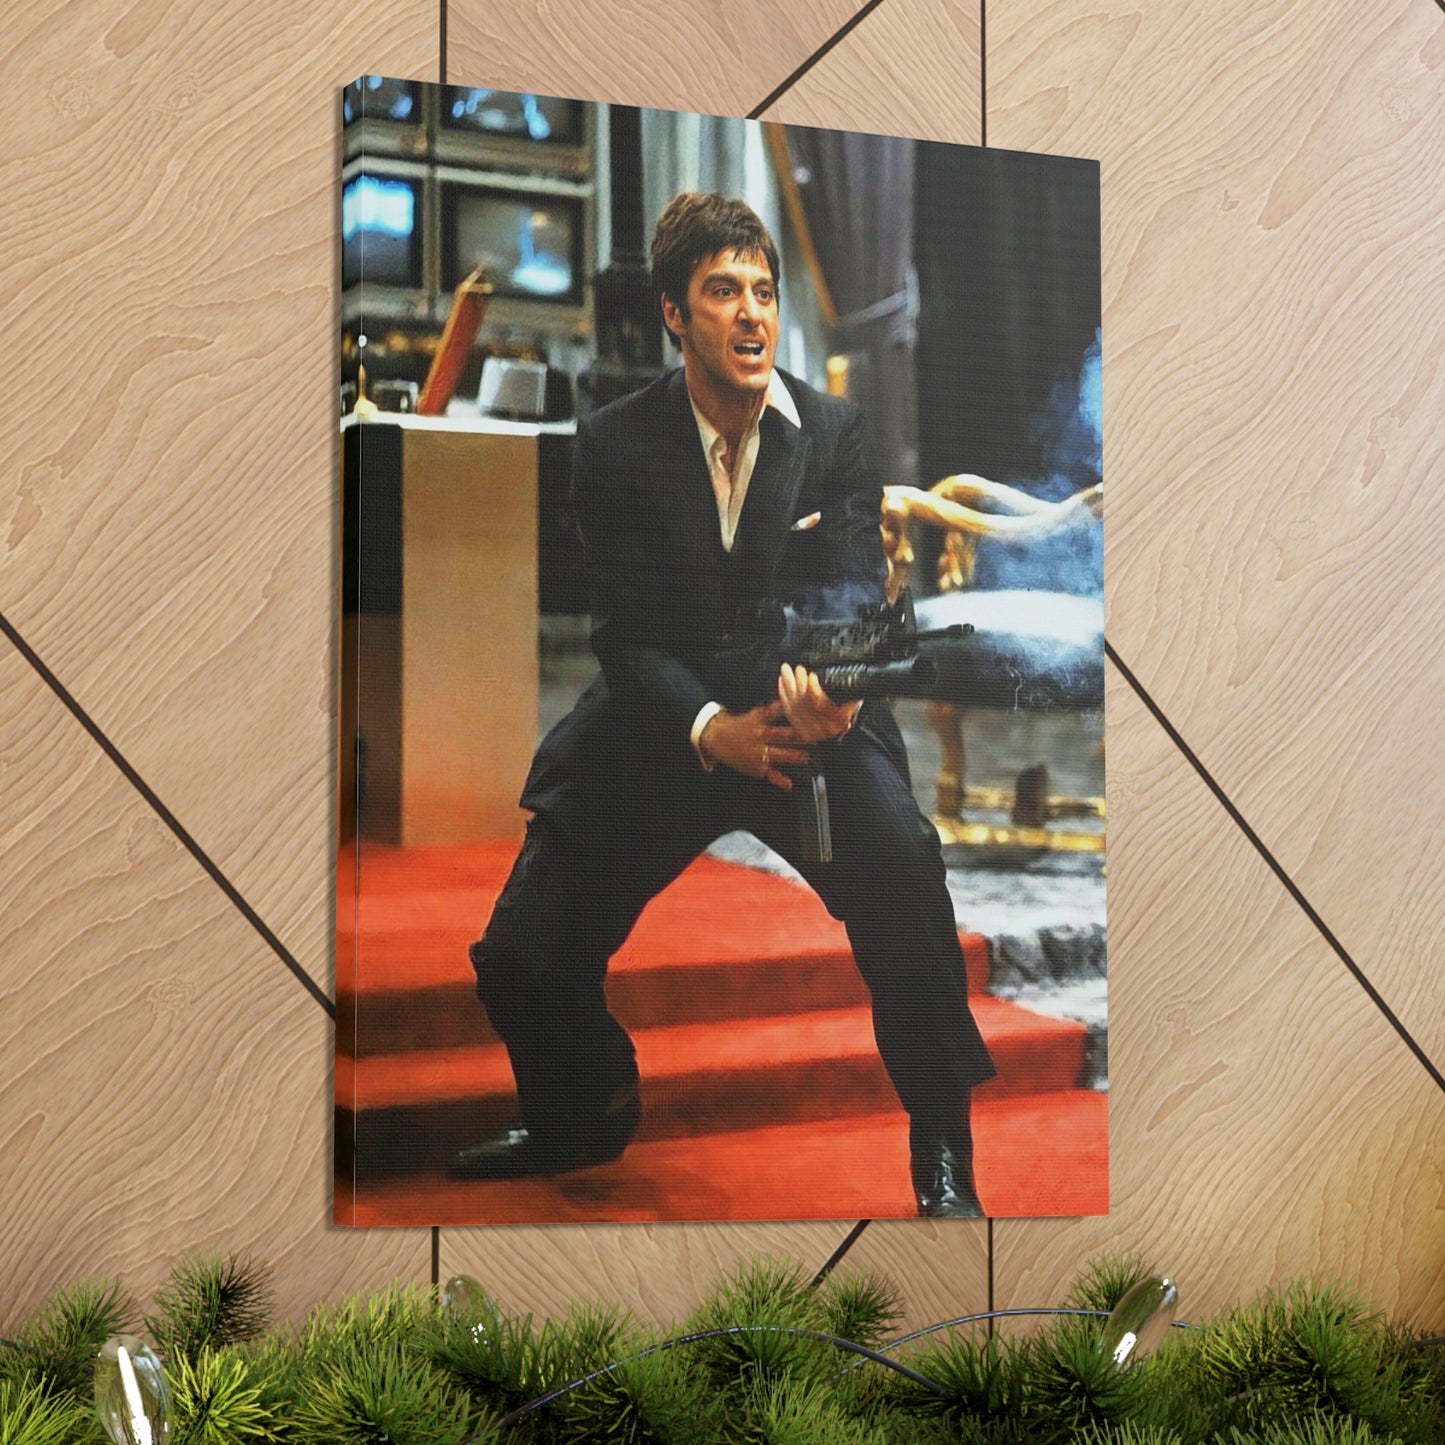 Tony Montana Scarface Final Shootout Scene In Mansion With M16 Canvas Wall Art